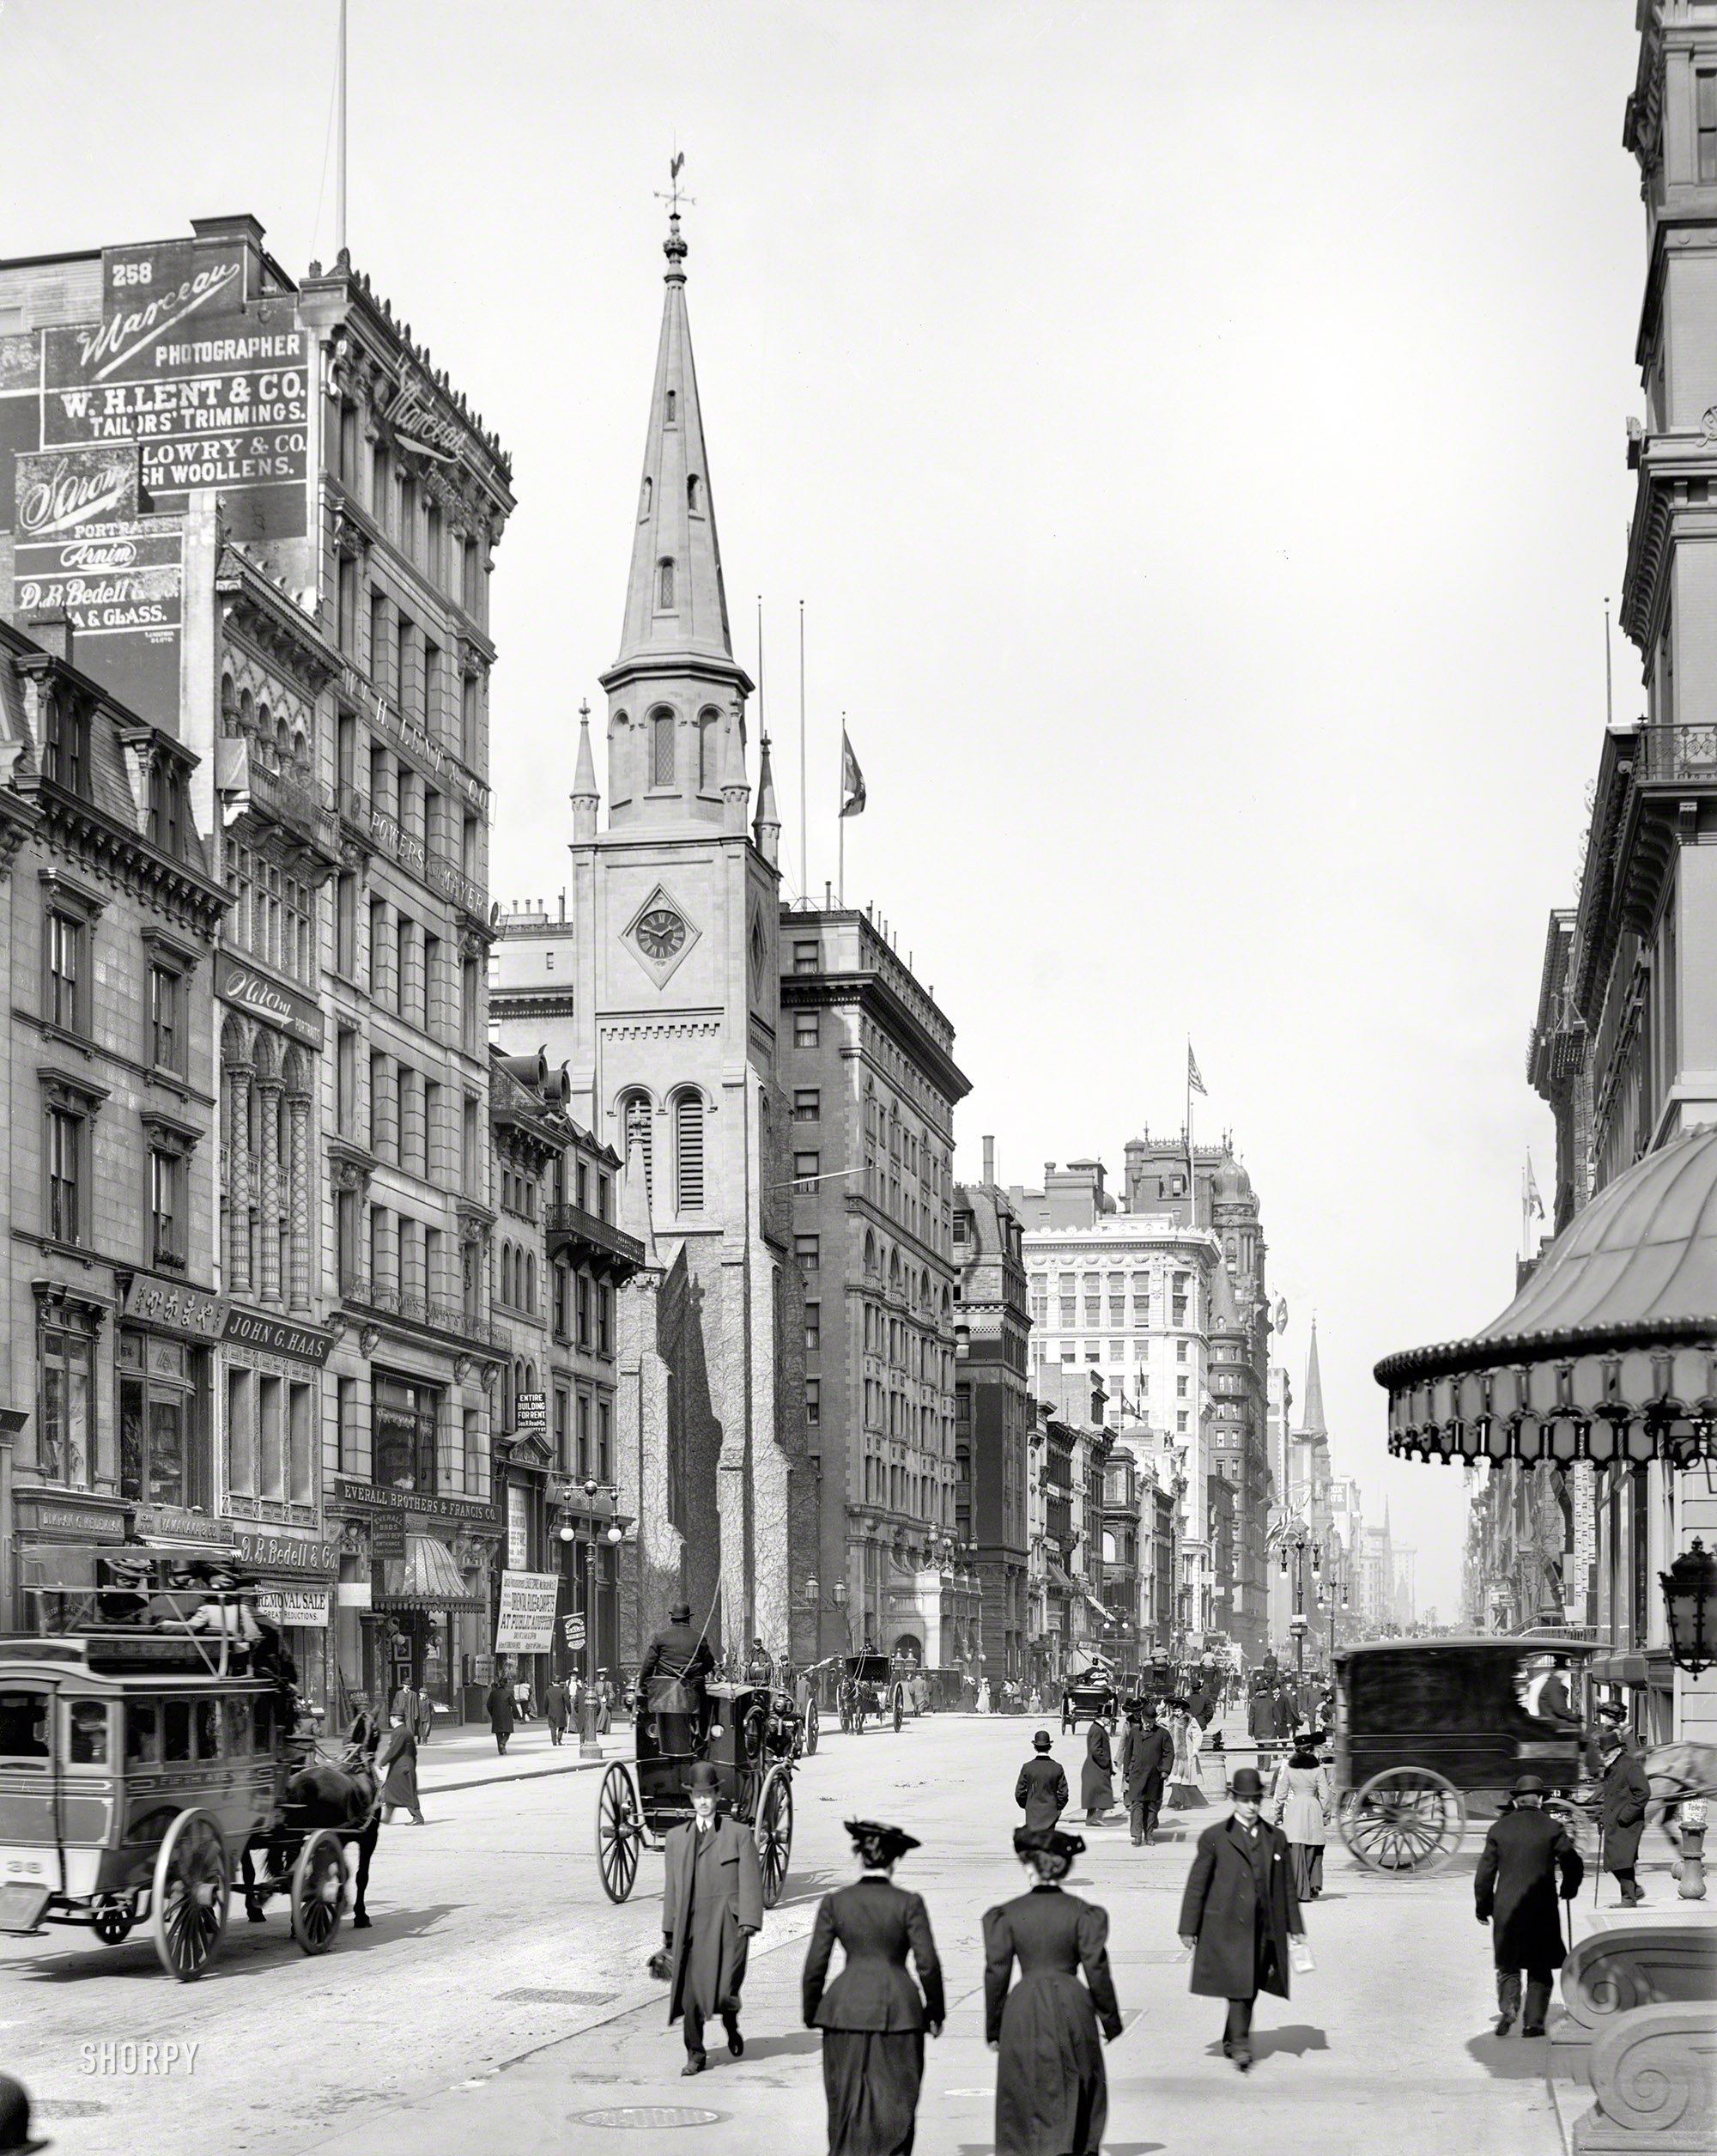 New York circa 1905. "Up Fifth Avenue from 28th Street." With a view of Marble Collegiate Church. 8x10 glass negative, Detroit Publishing Co. View full size.